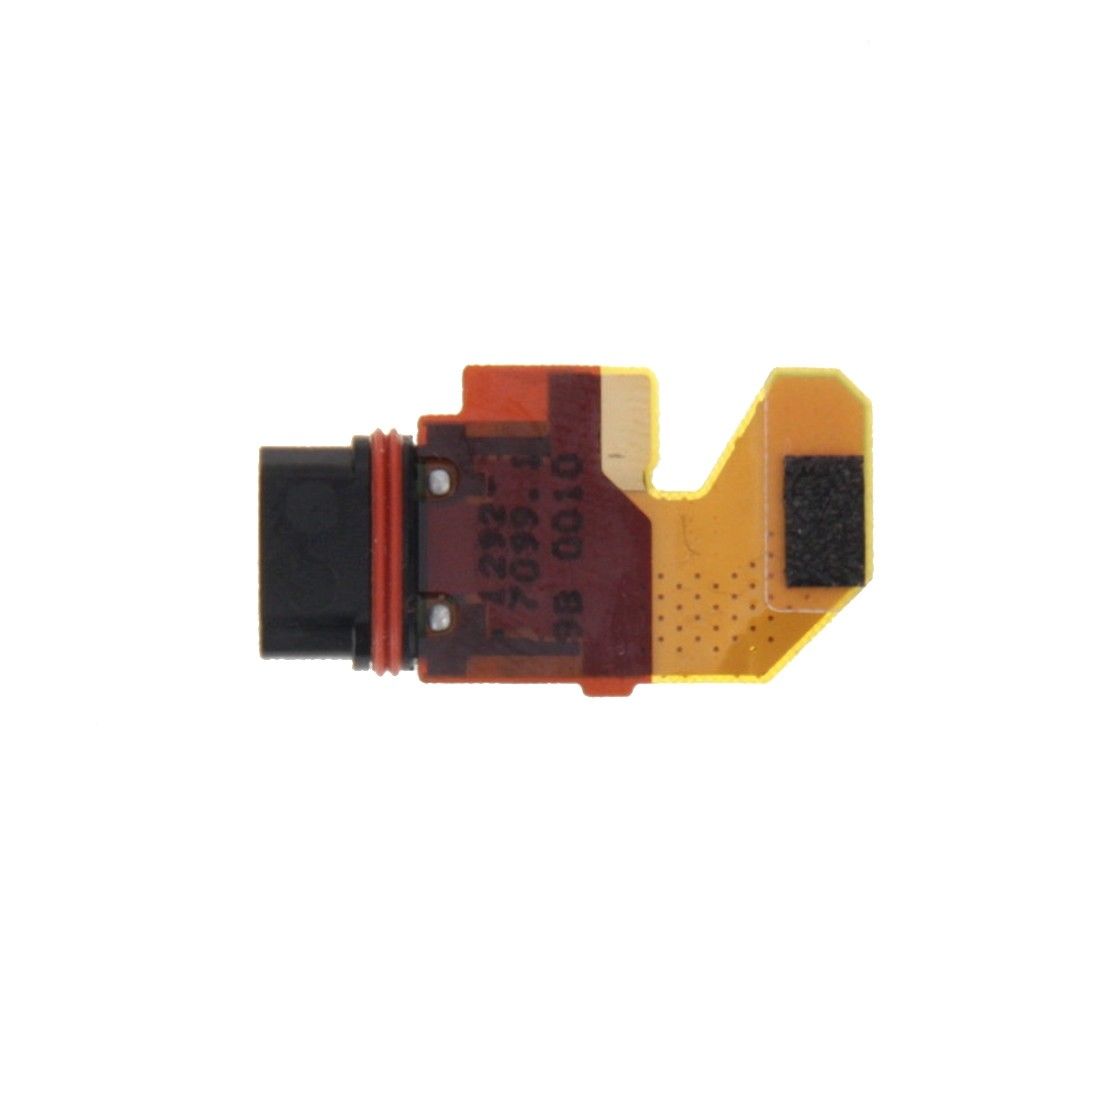 Sony Xperia Z5 Micro USB Charging Port Connector Flex for [product_price] - First Help Tech